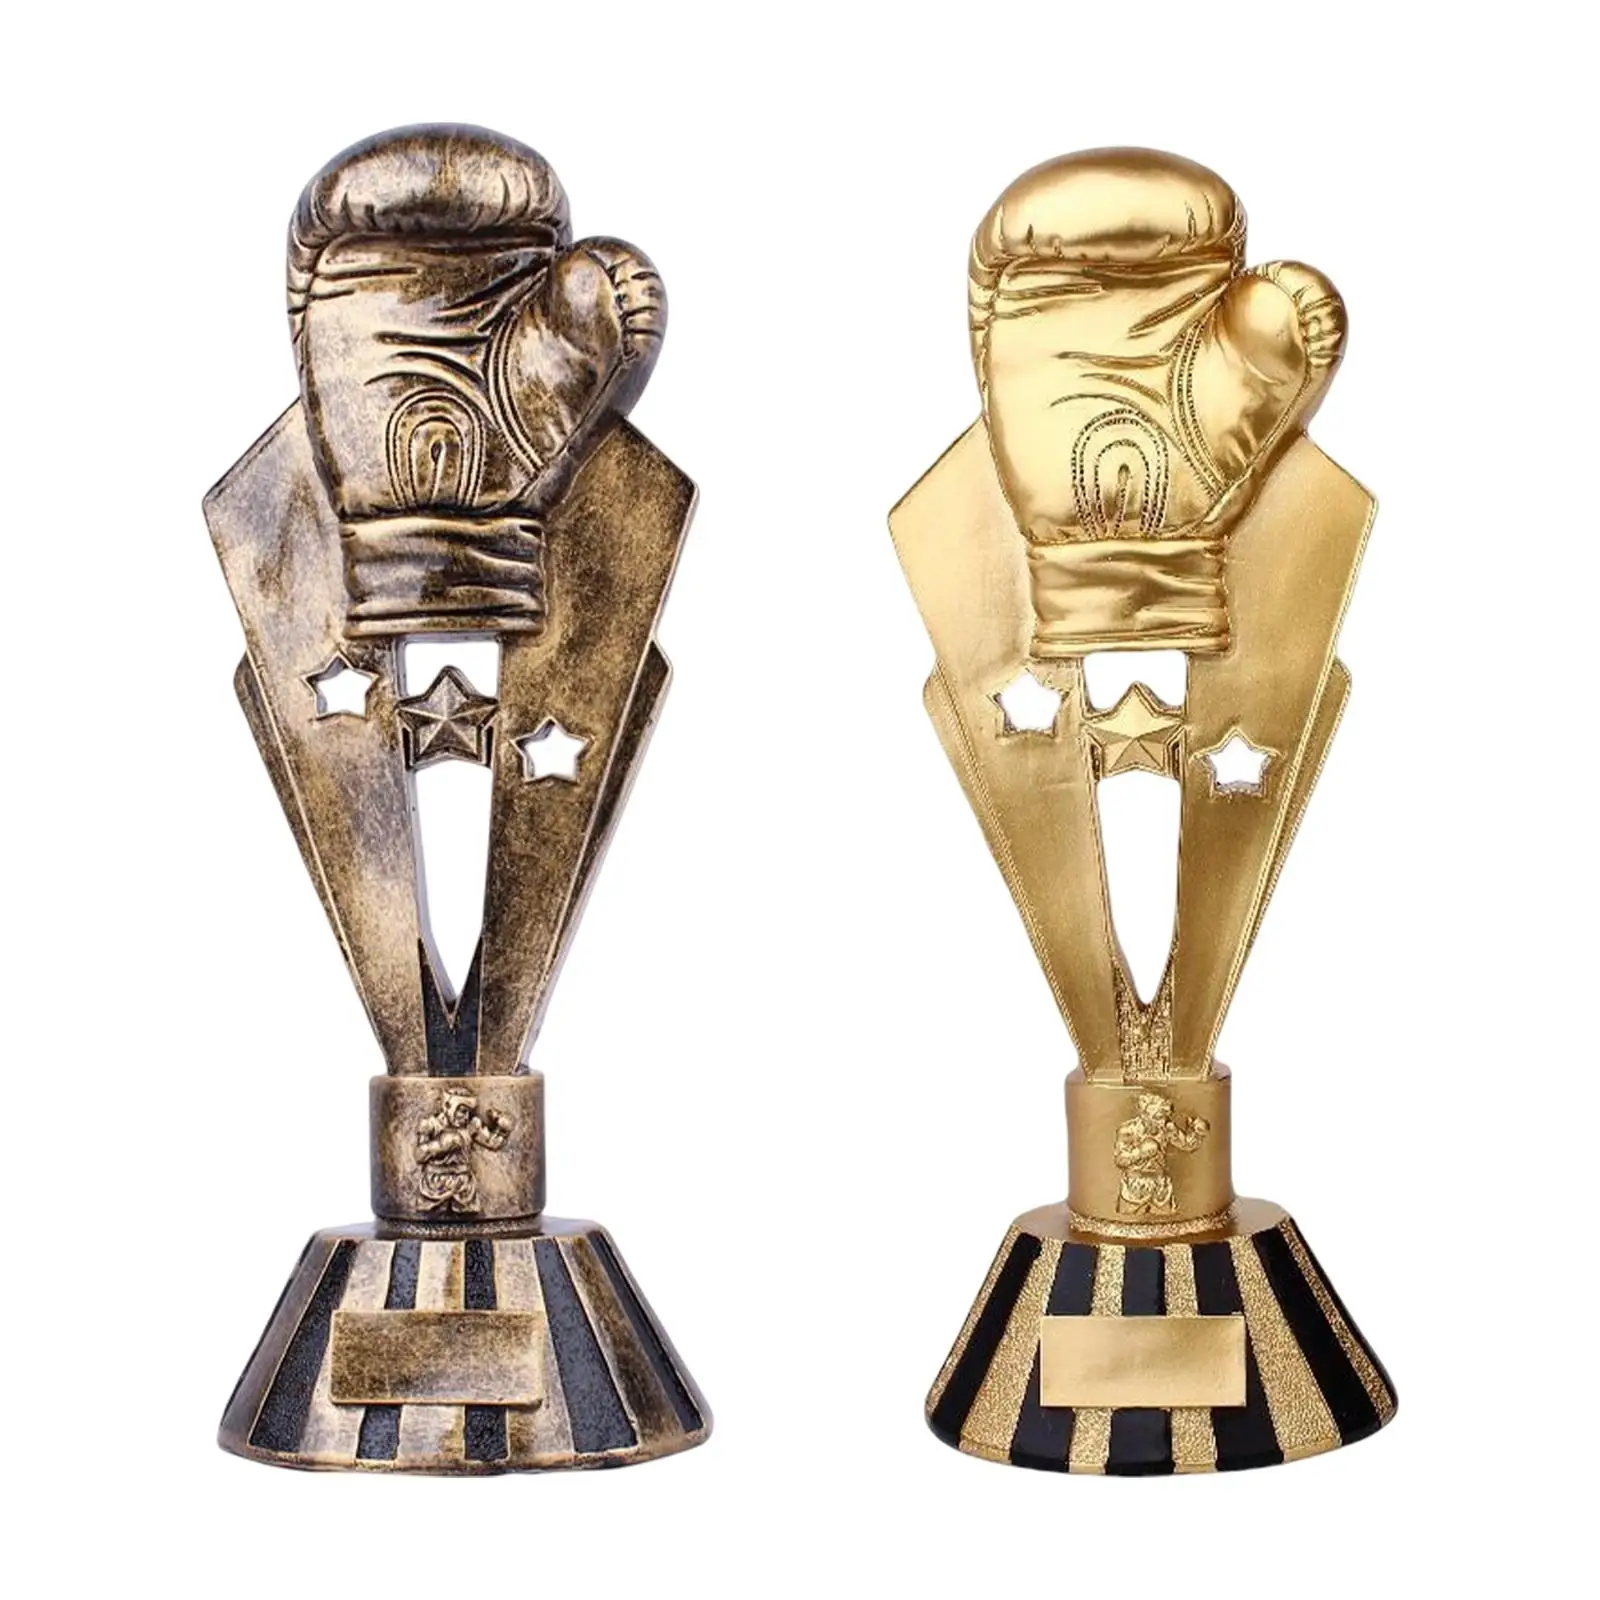 Boxing Trophy, Boxing Glove Sculpture Boxing Award Highly Detailed Resin